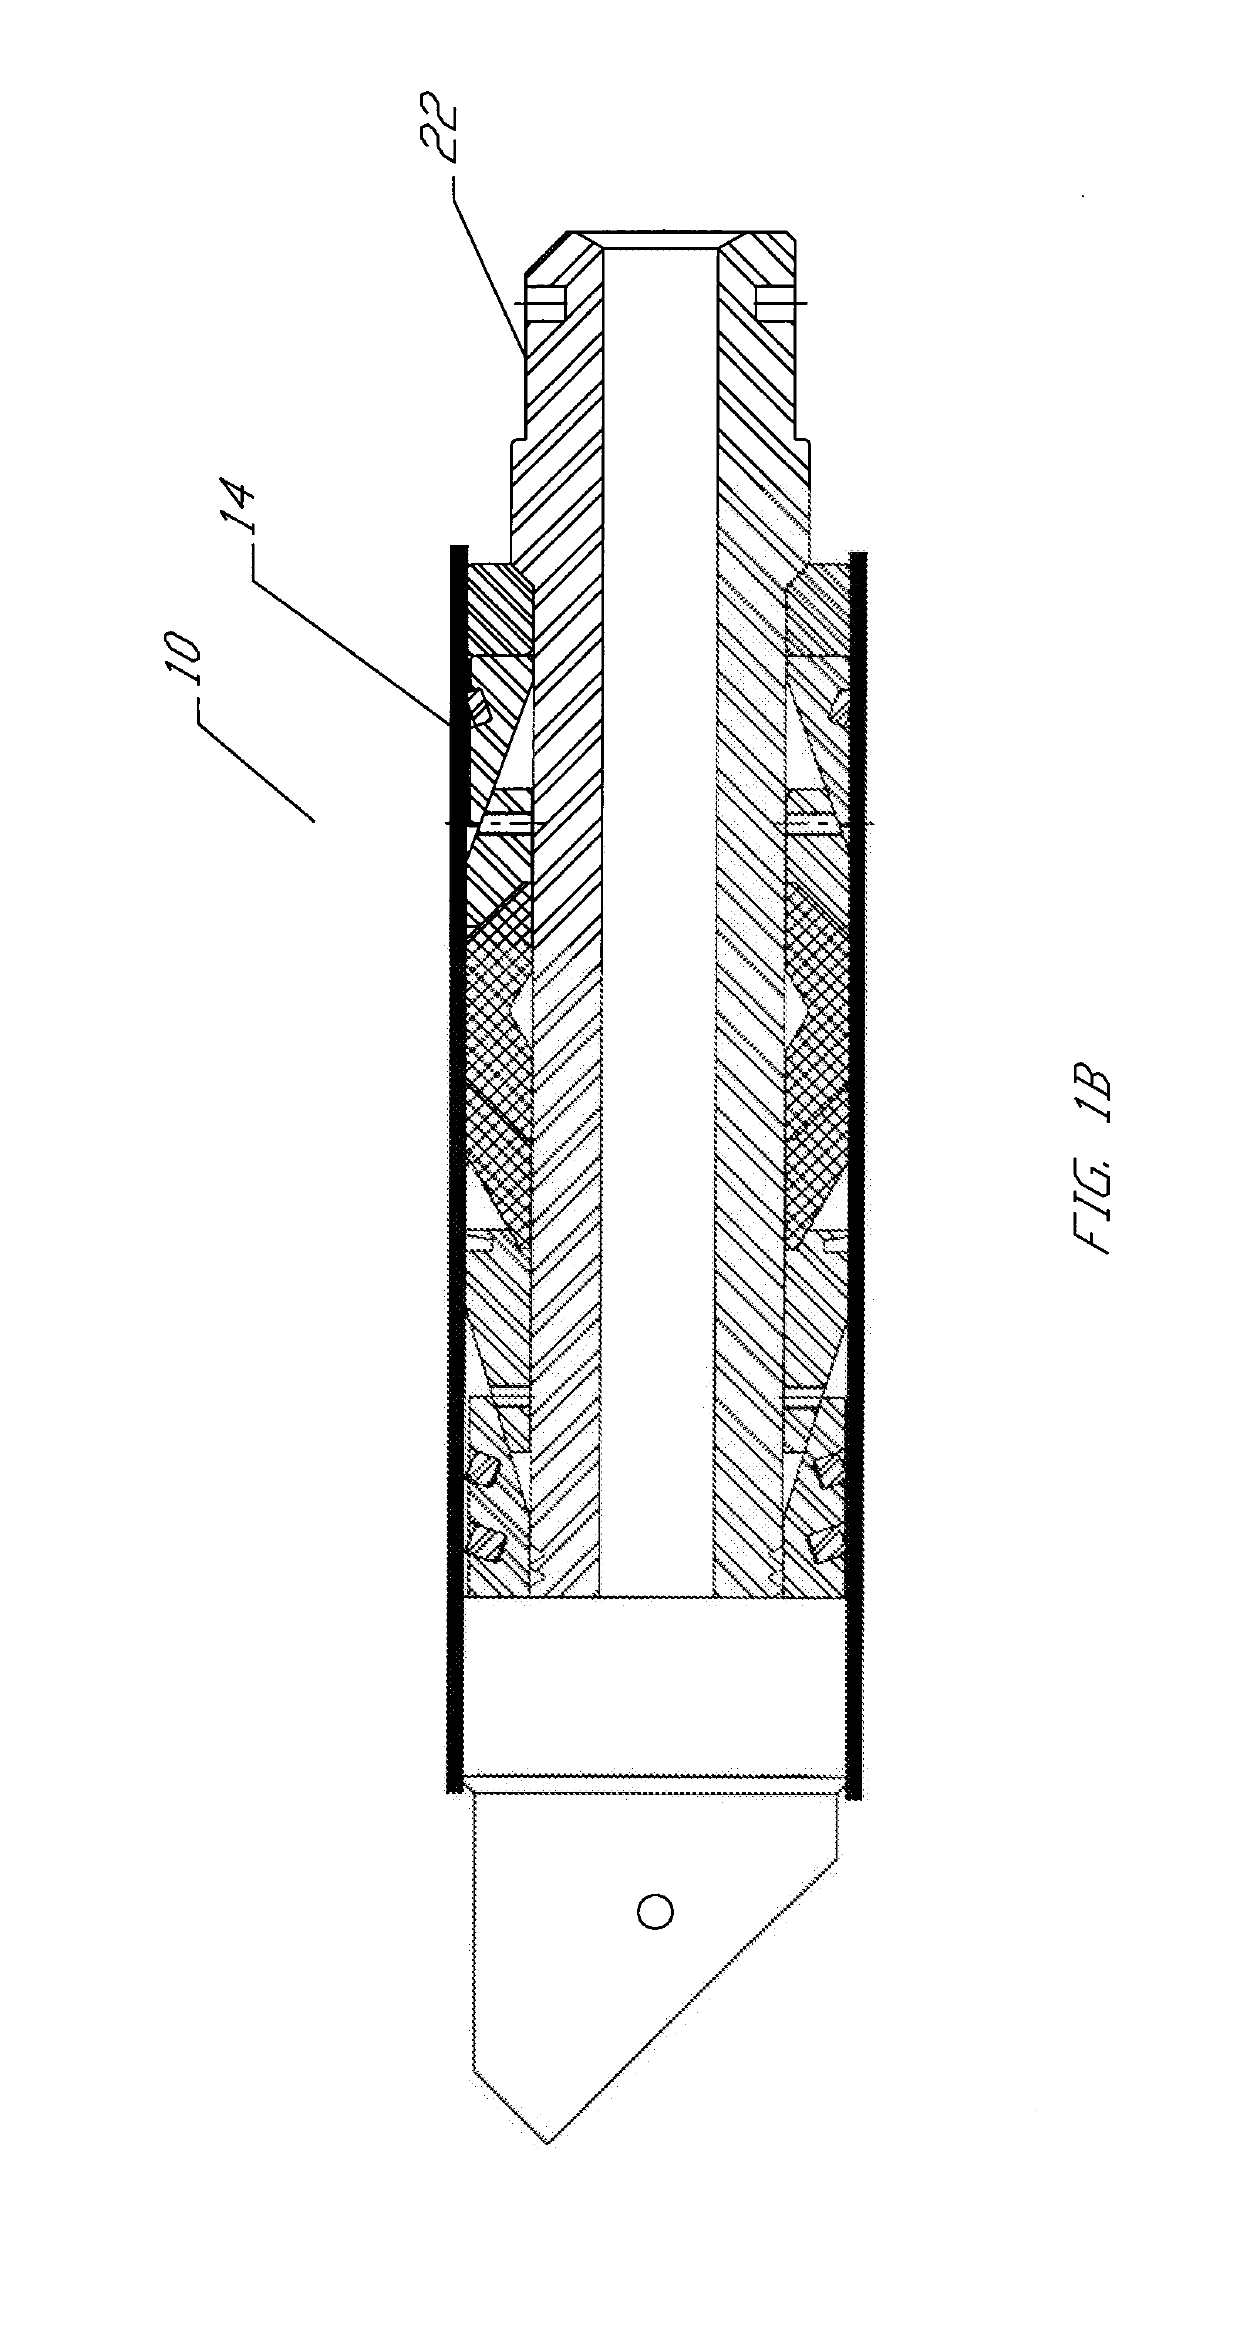 Downhole tool with protective covering